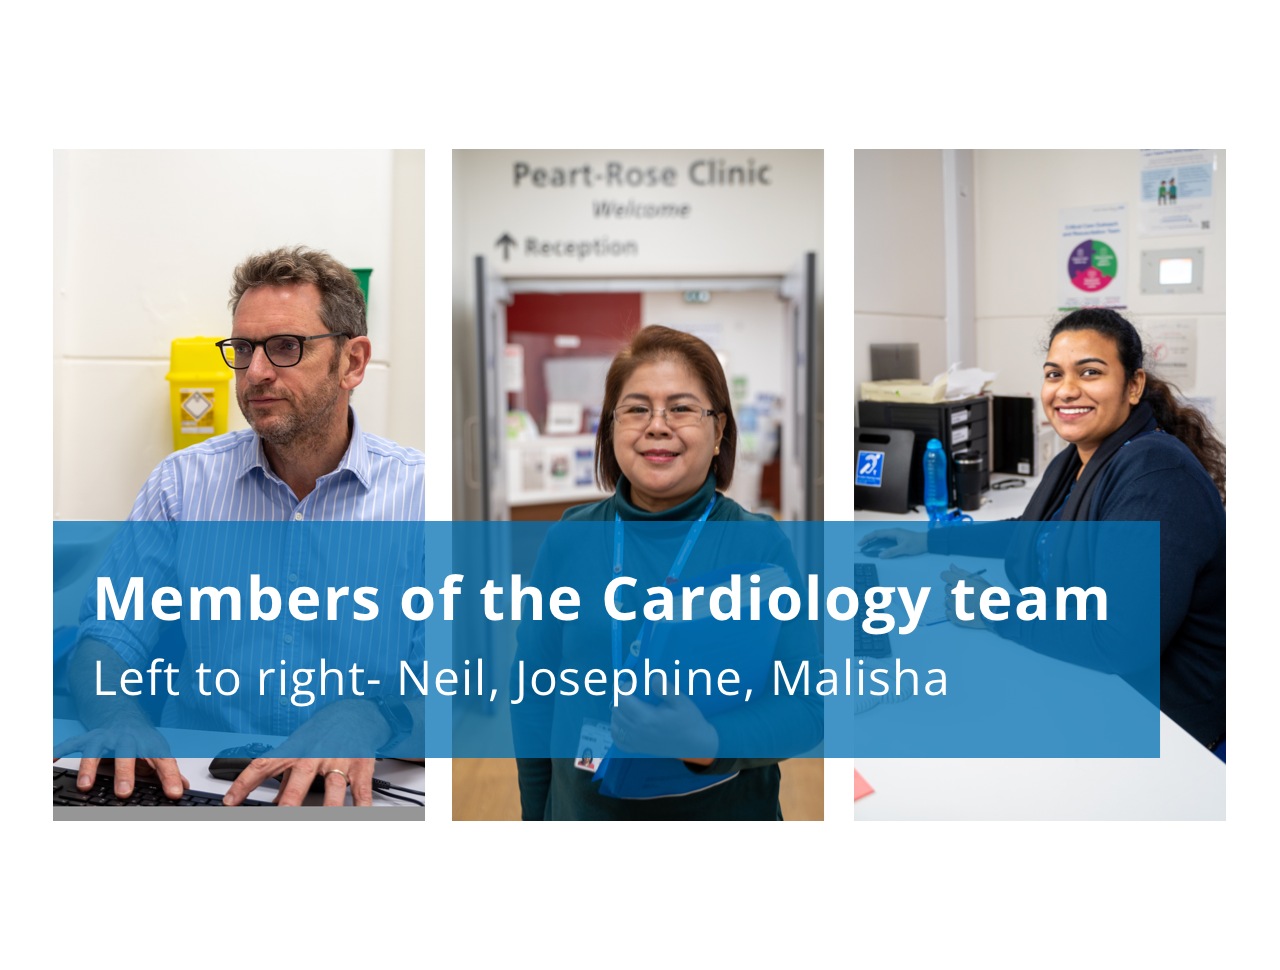 Members of the cardiology team